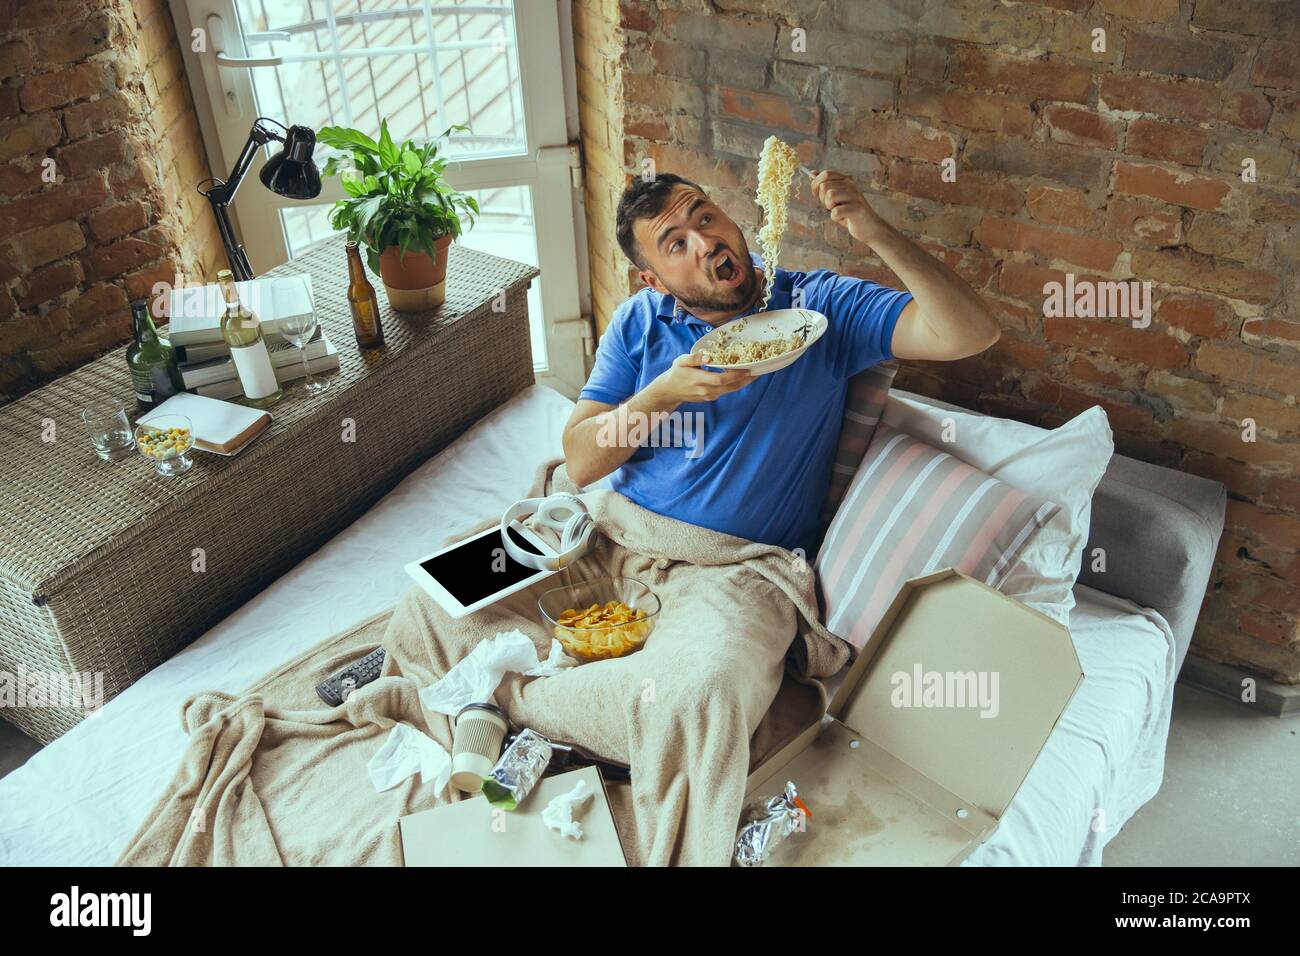 Eating instant noodles with funny hungry face. Lazy man living in his bed surrounded with messy. No need to go out to be happy. Using gadgets, watching movie and series, emotional. Fast food. Stock Photo